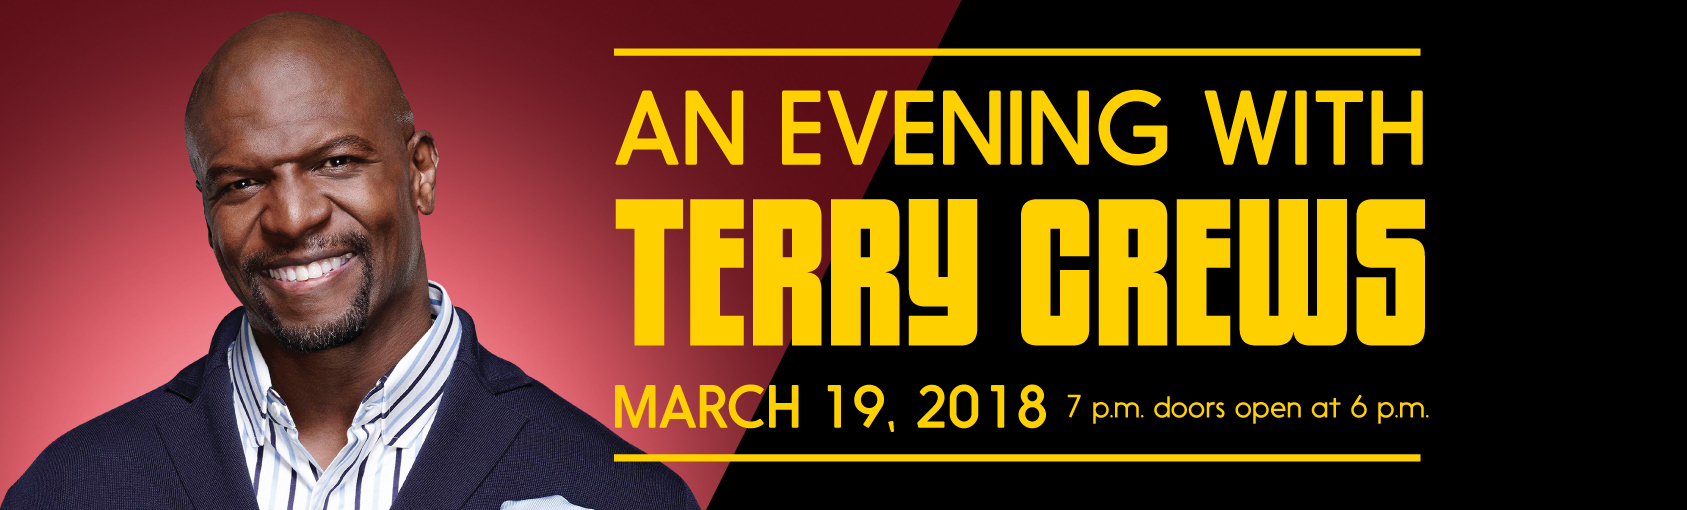 An Evening with Terry Crews banner